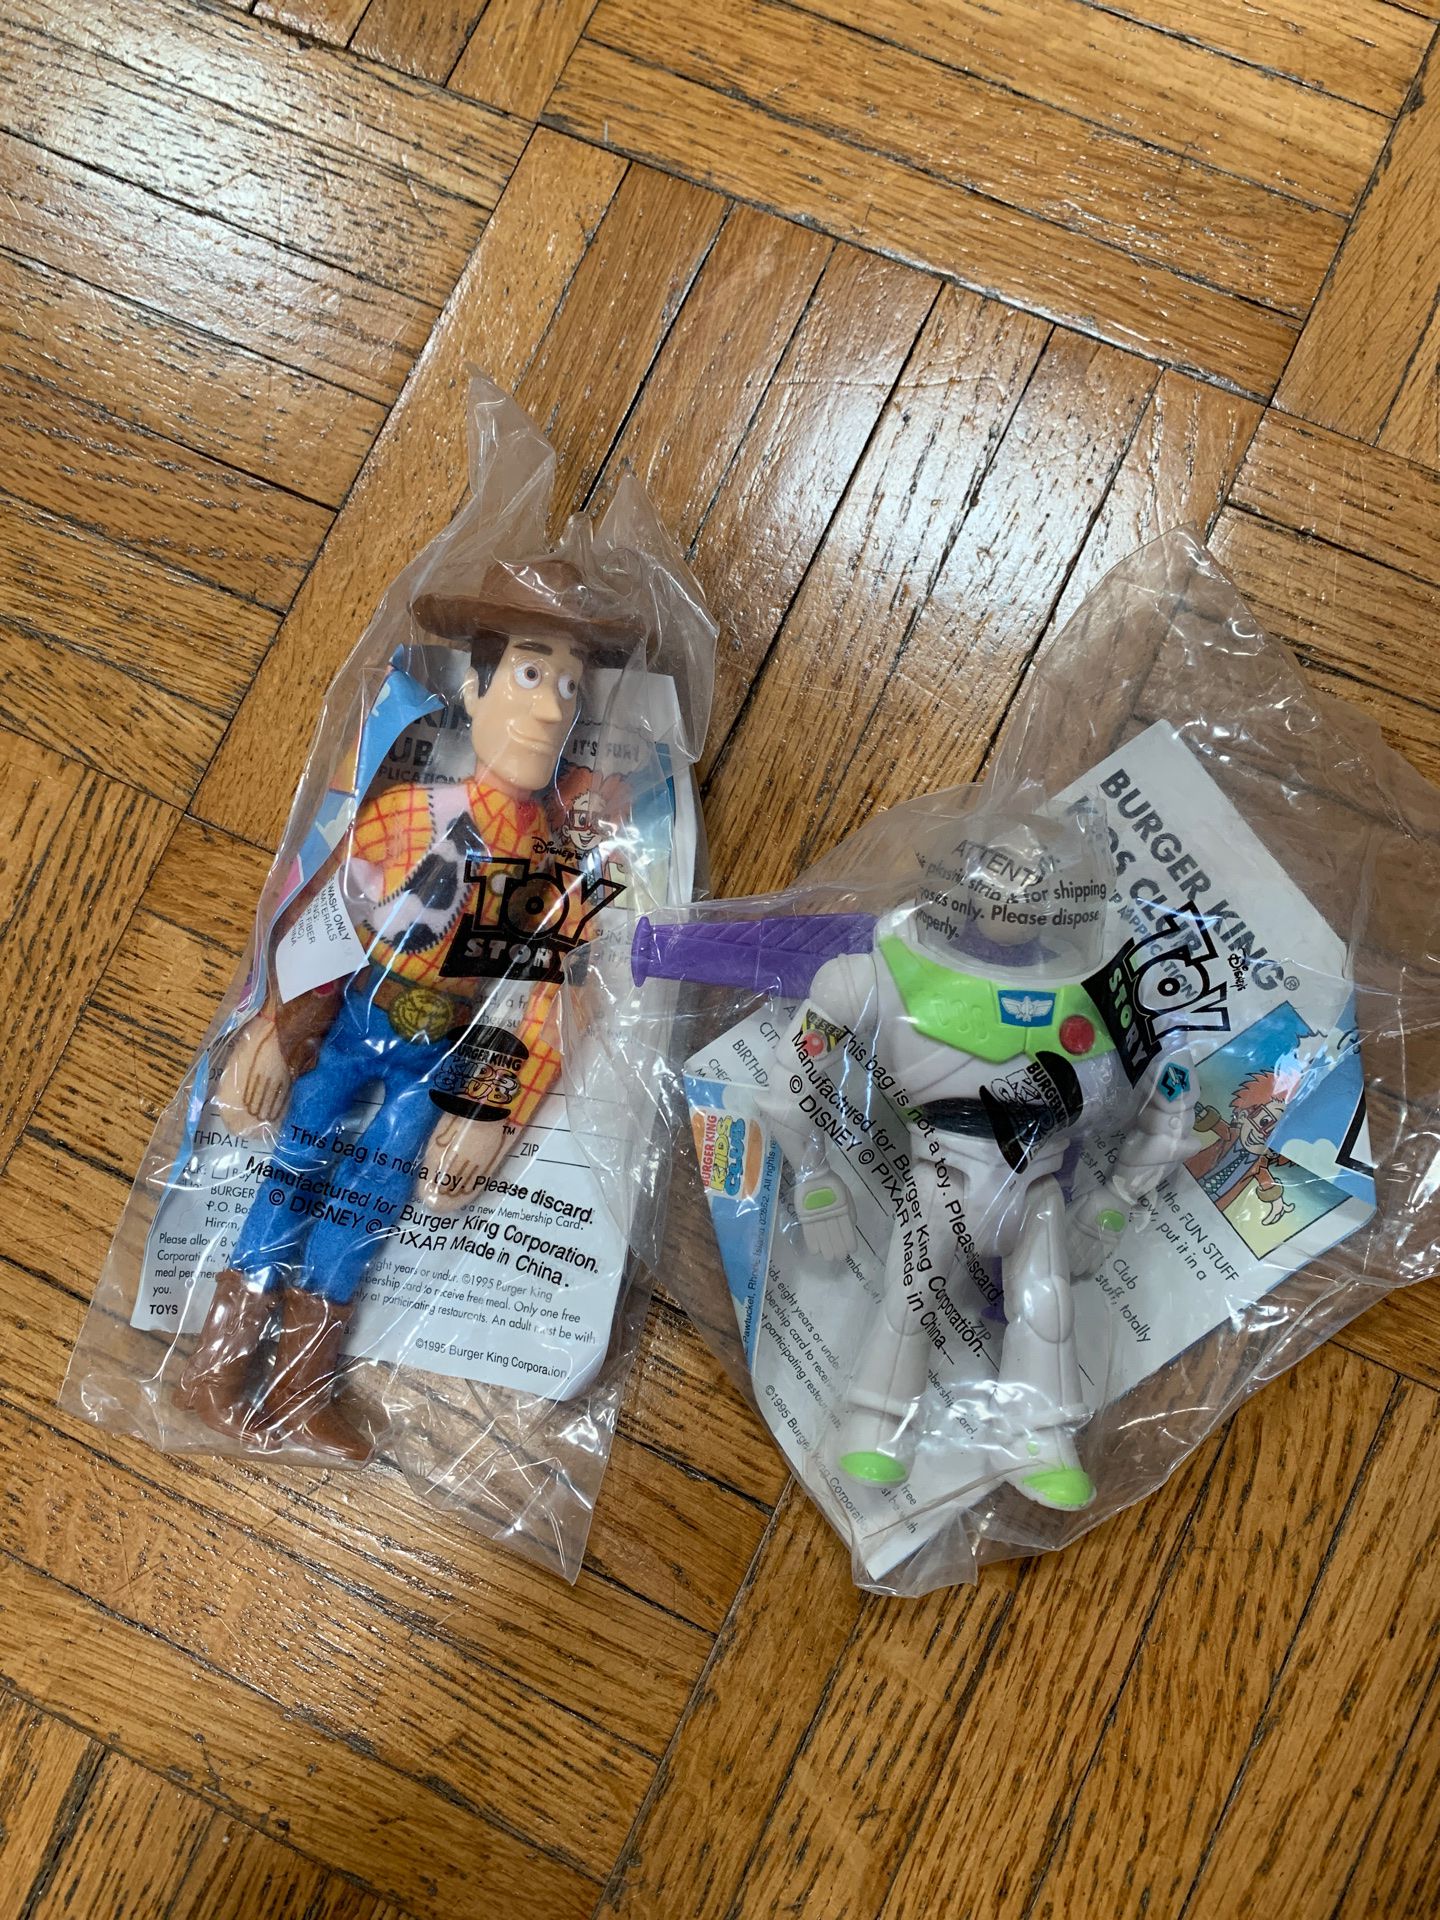 Burger King TOY STORY collectibles